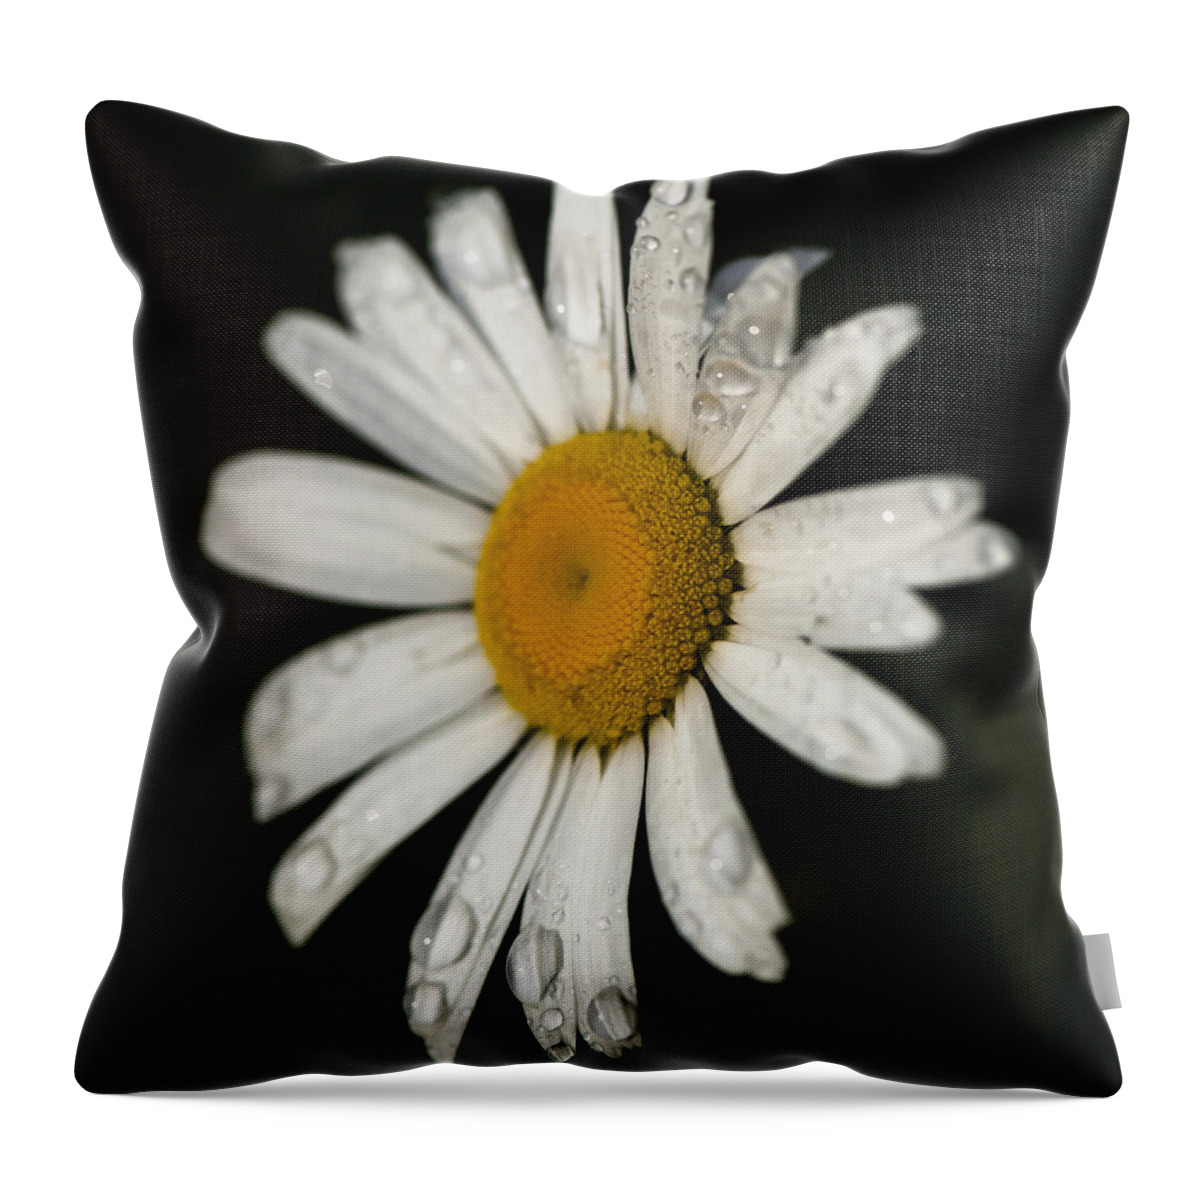  Throw Pillow featuring the photograph Morning Daisy by Dan Hefle